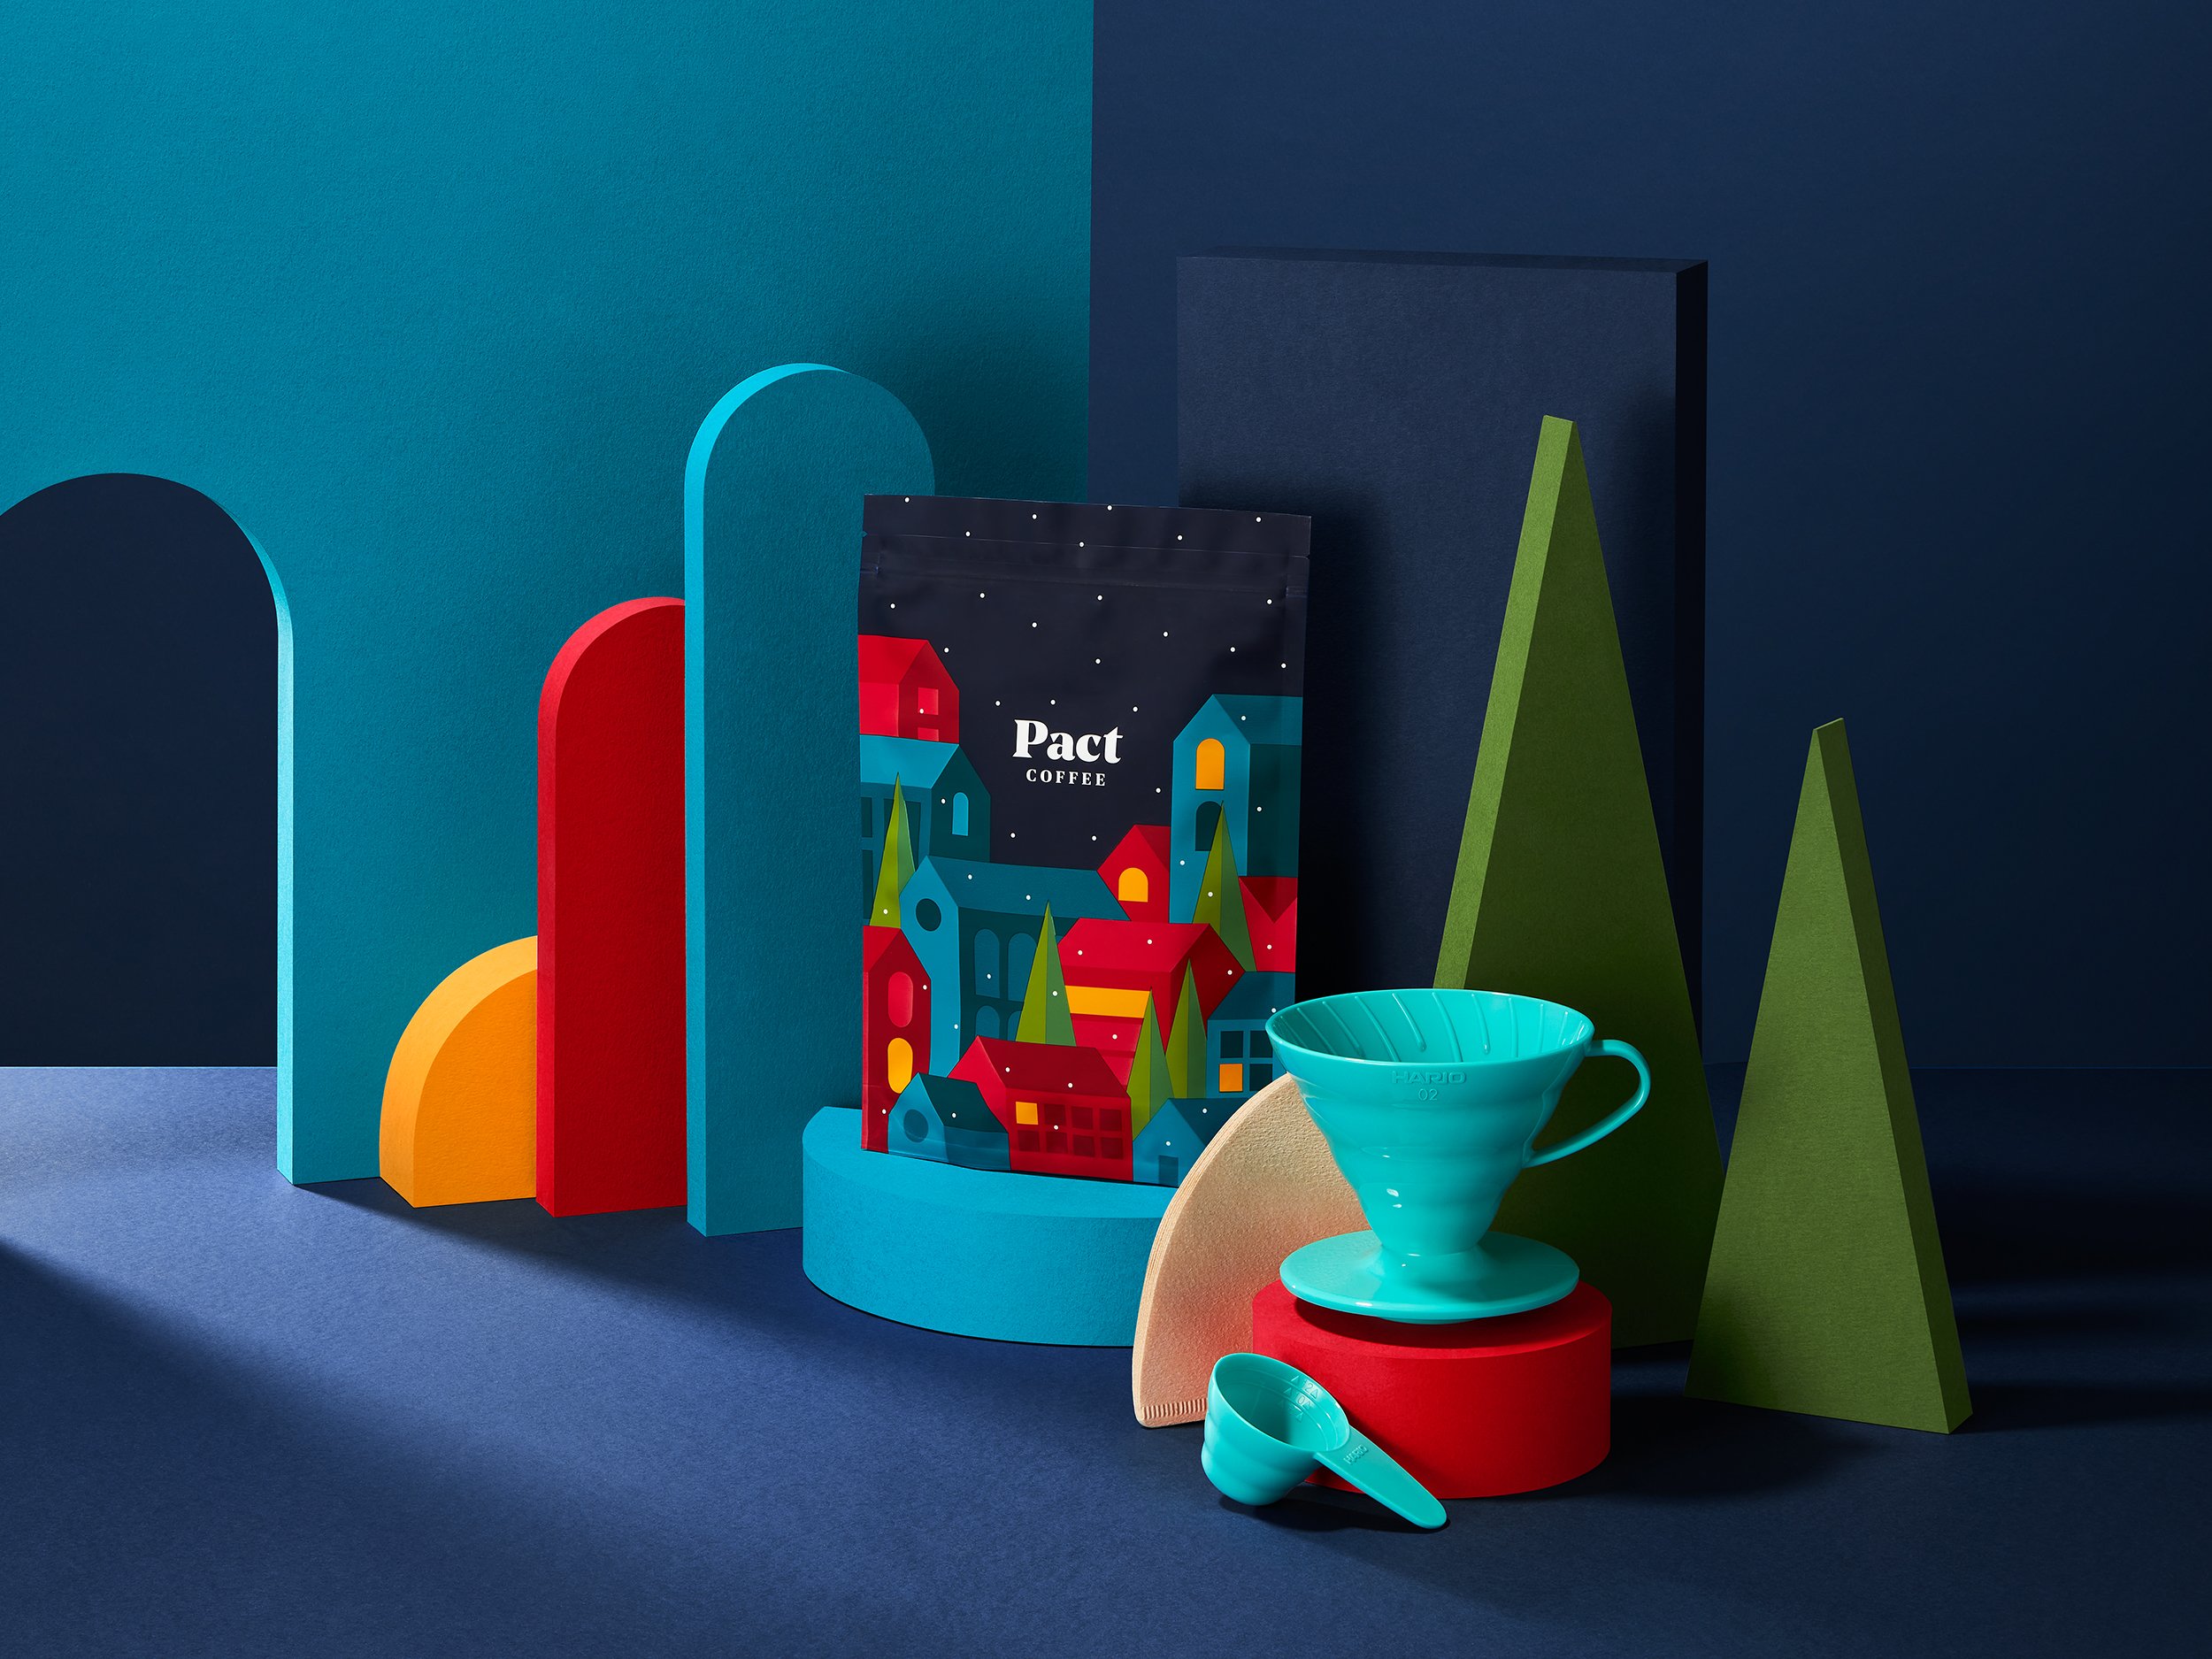 Pact Coffee Advent Box, V60, Bialetti and Aeropress - Product photography by Simon Lyle Ritchie